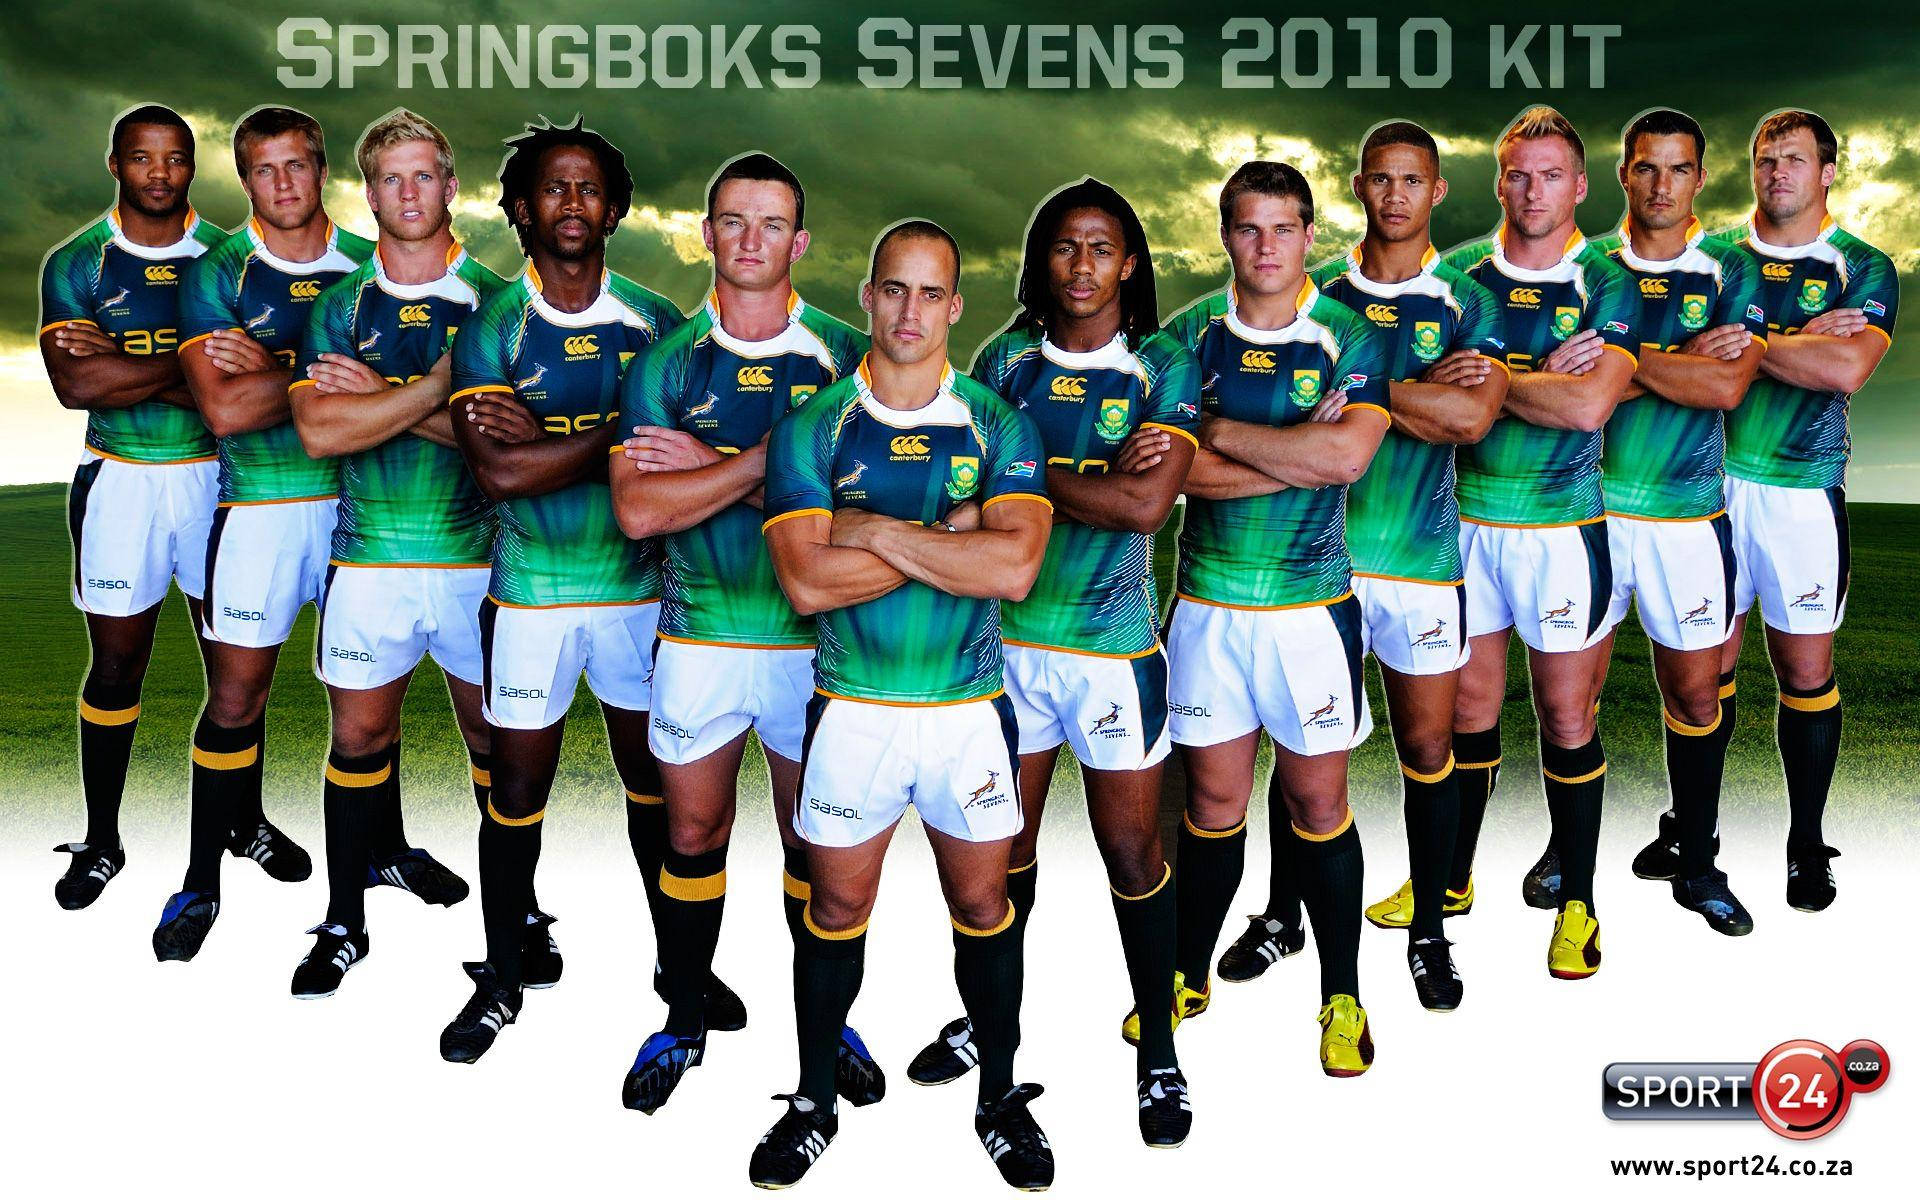 Players Of Springboks Rugby Showcasing Their 2010 Kit Background